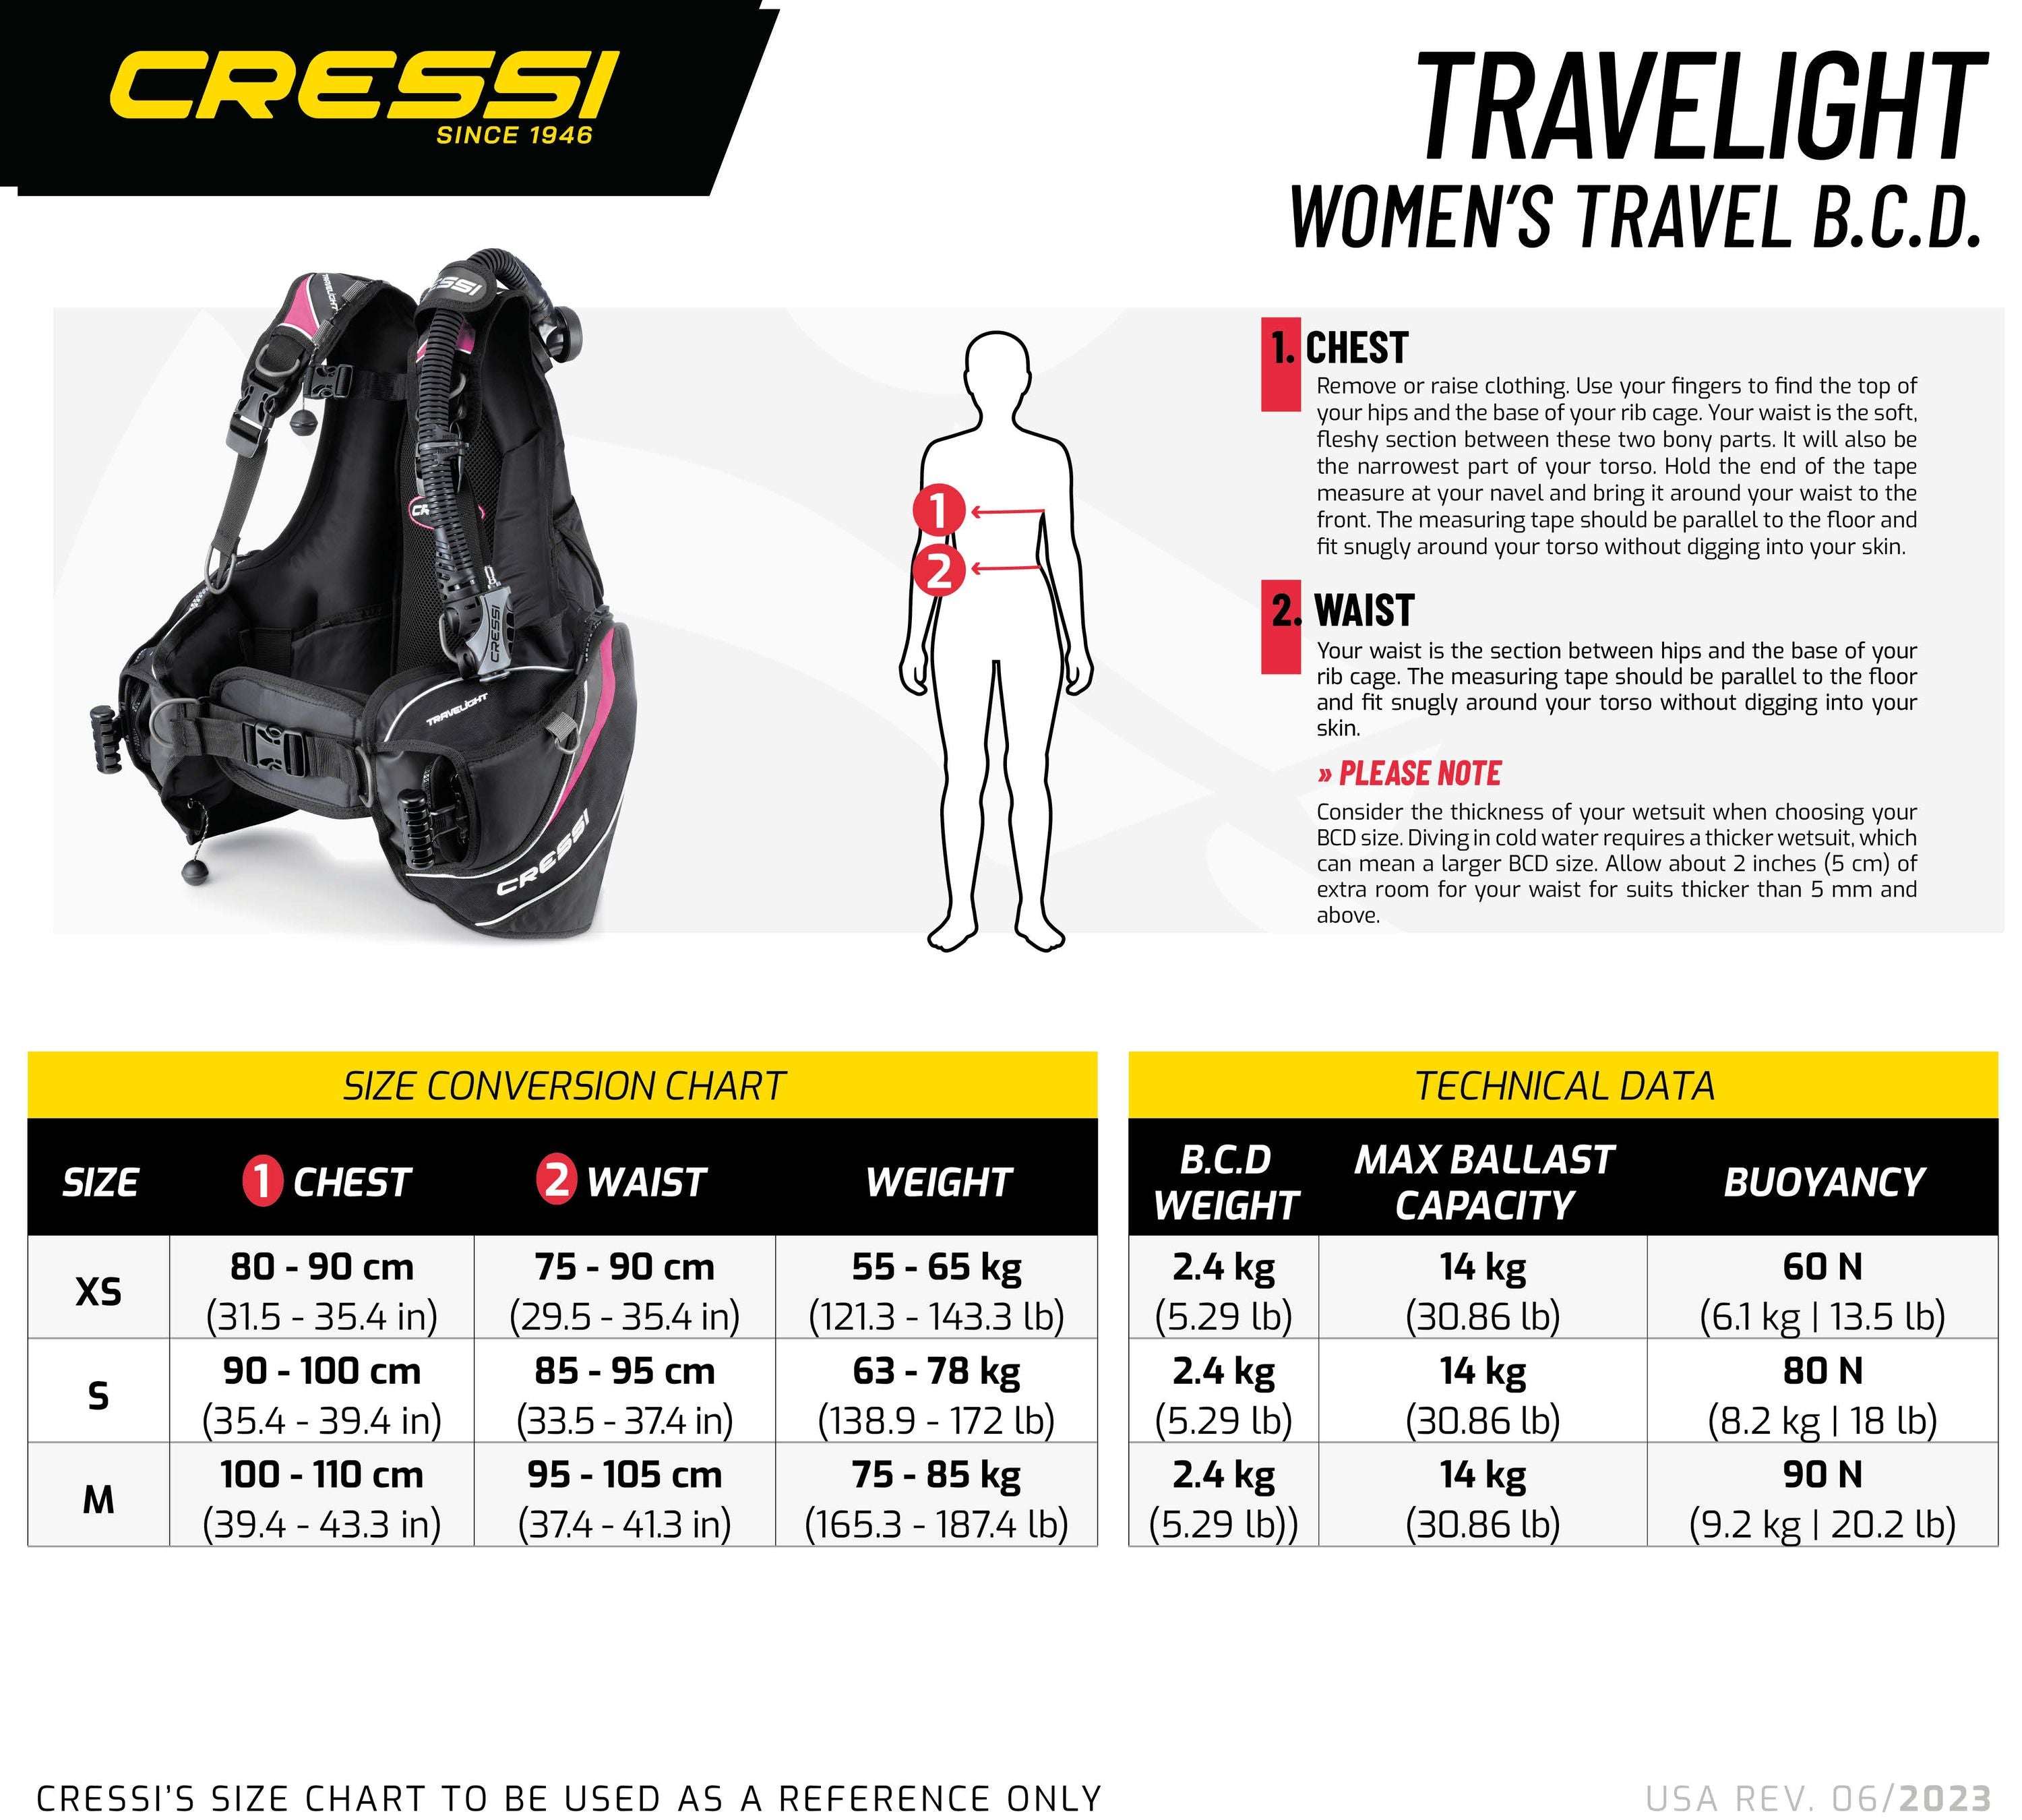 Cressi Travelight Women's BCD Size Guide